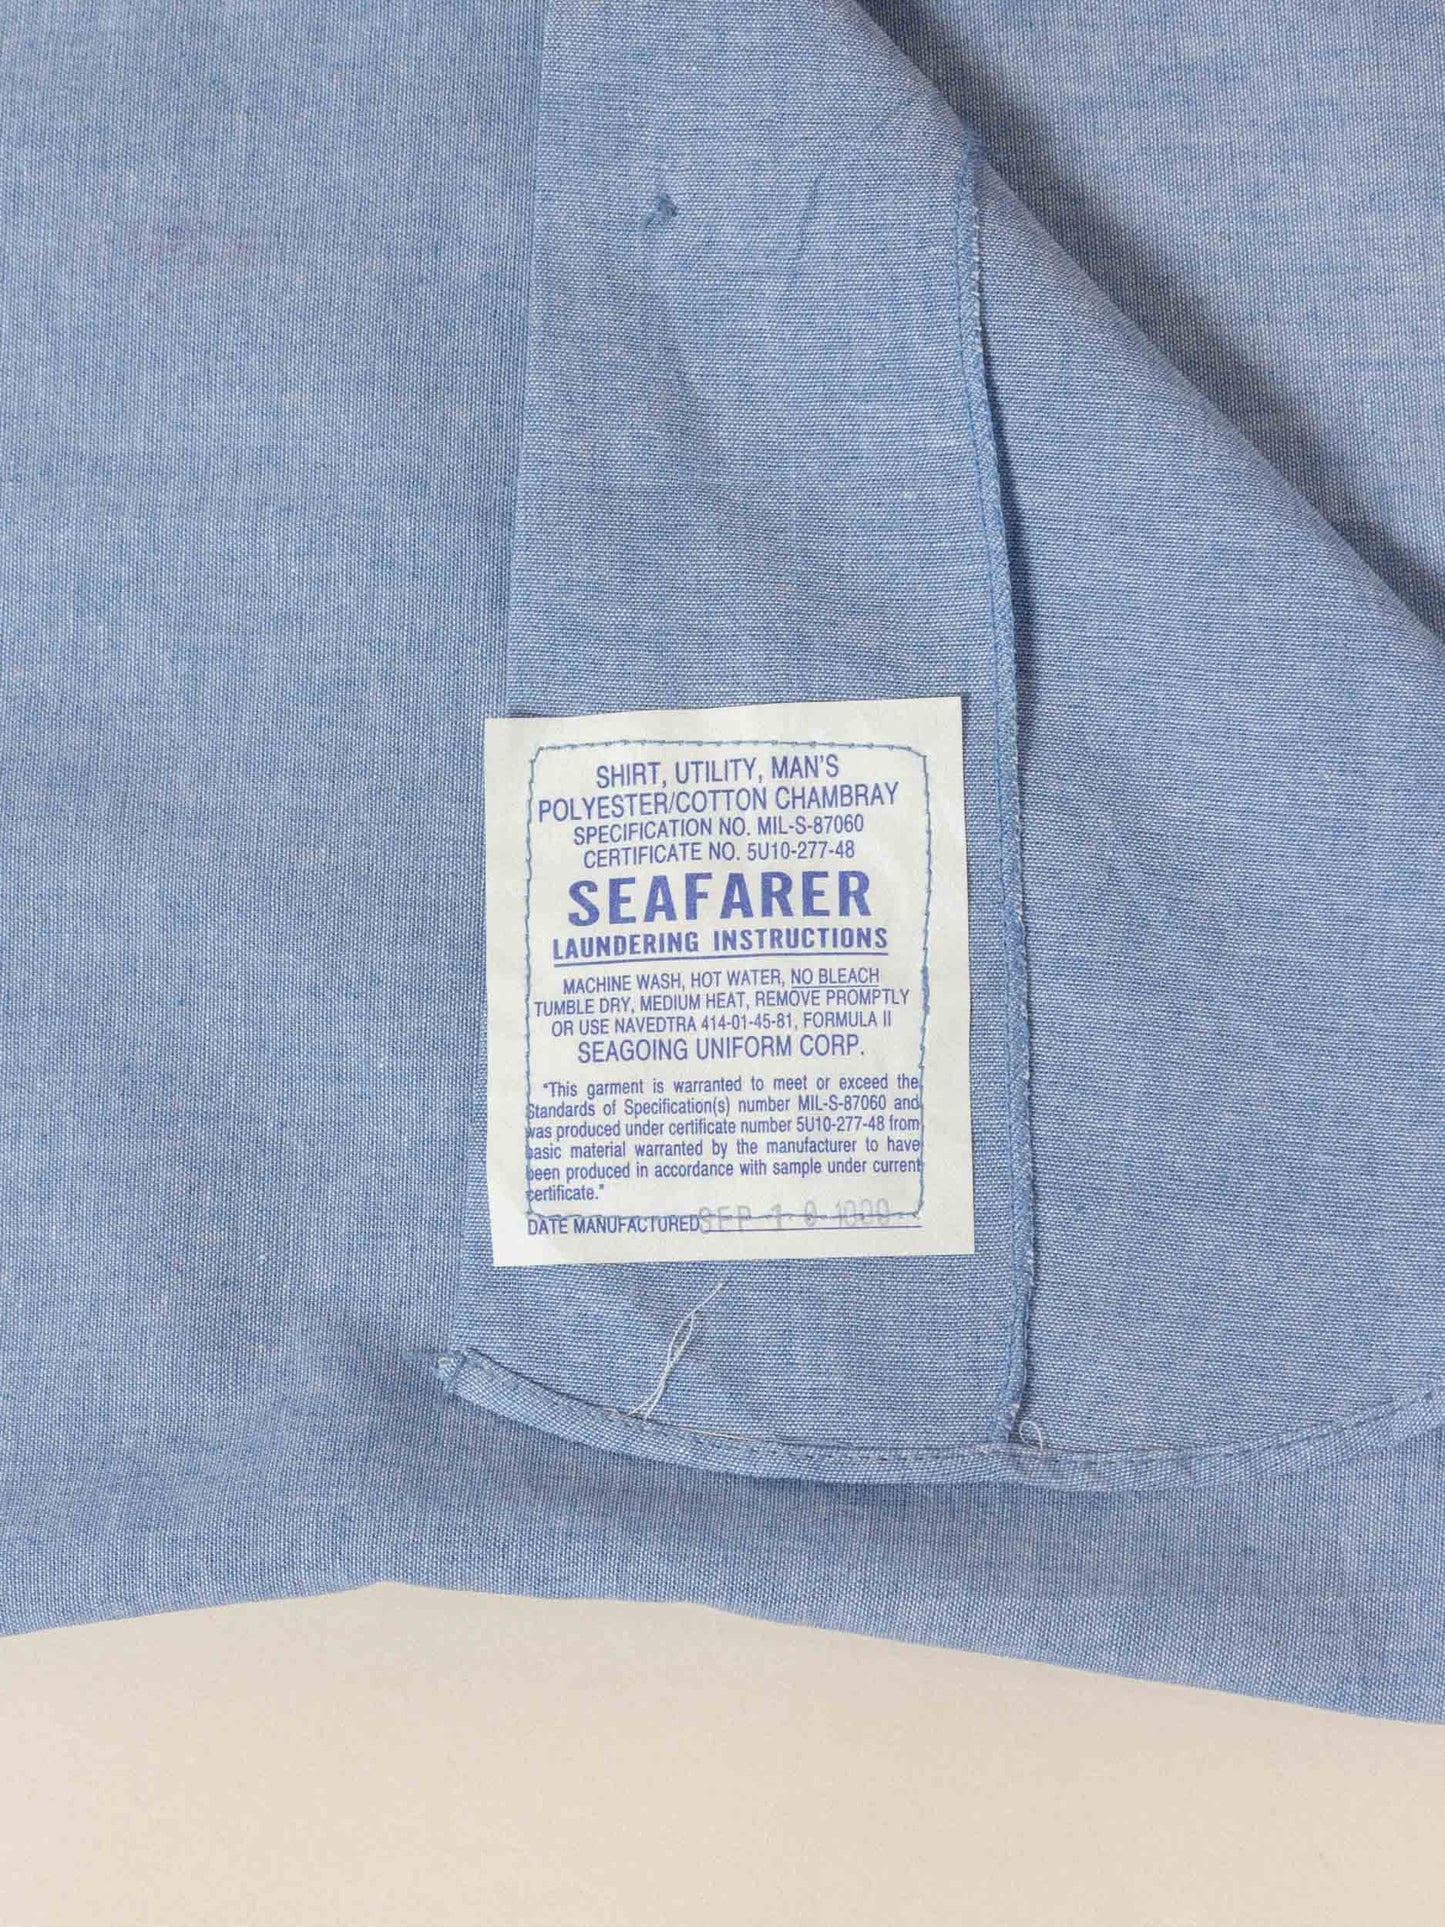 Vintage Deadstock US Made S-S Chambray Shirts